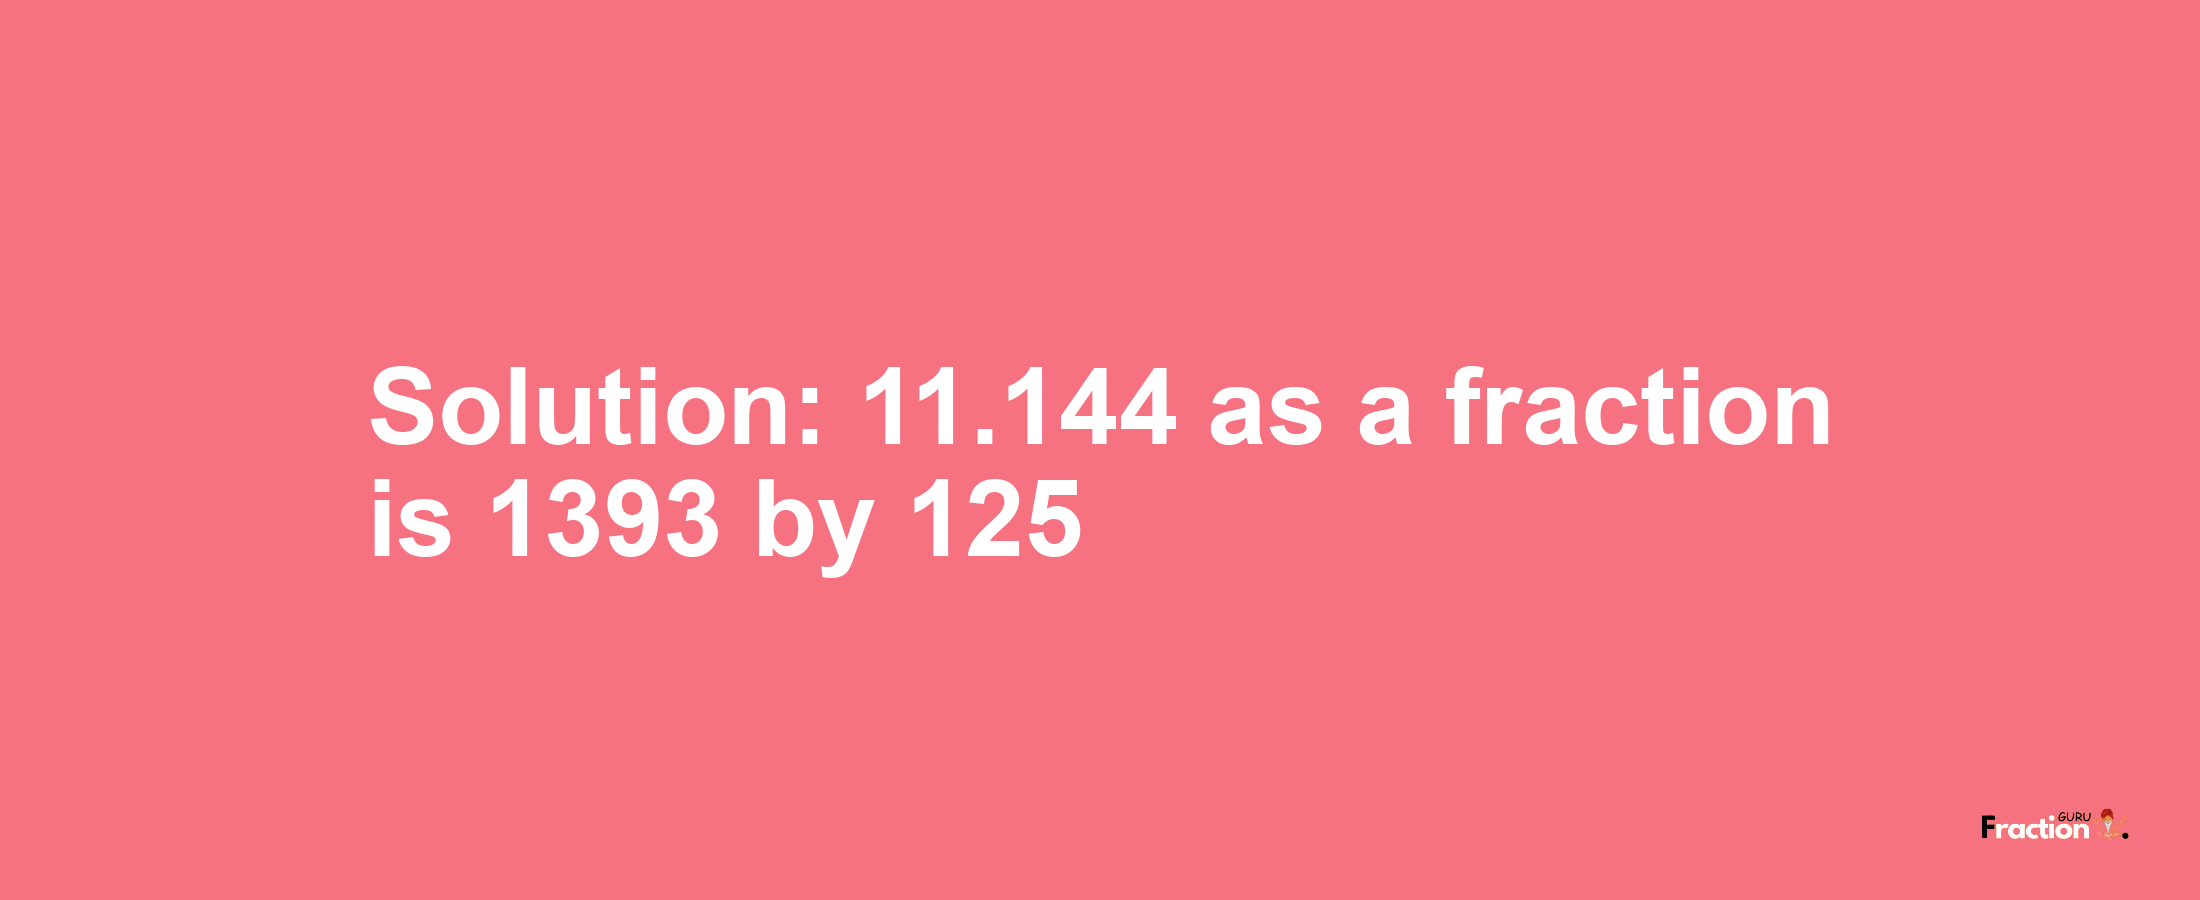 Solution:11.144 as a fraction is 1393/125